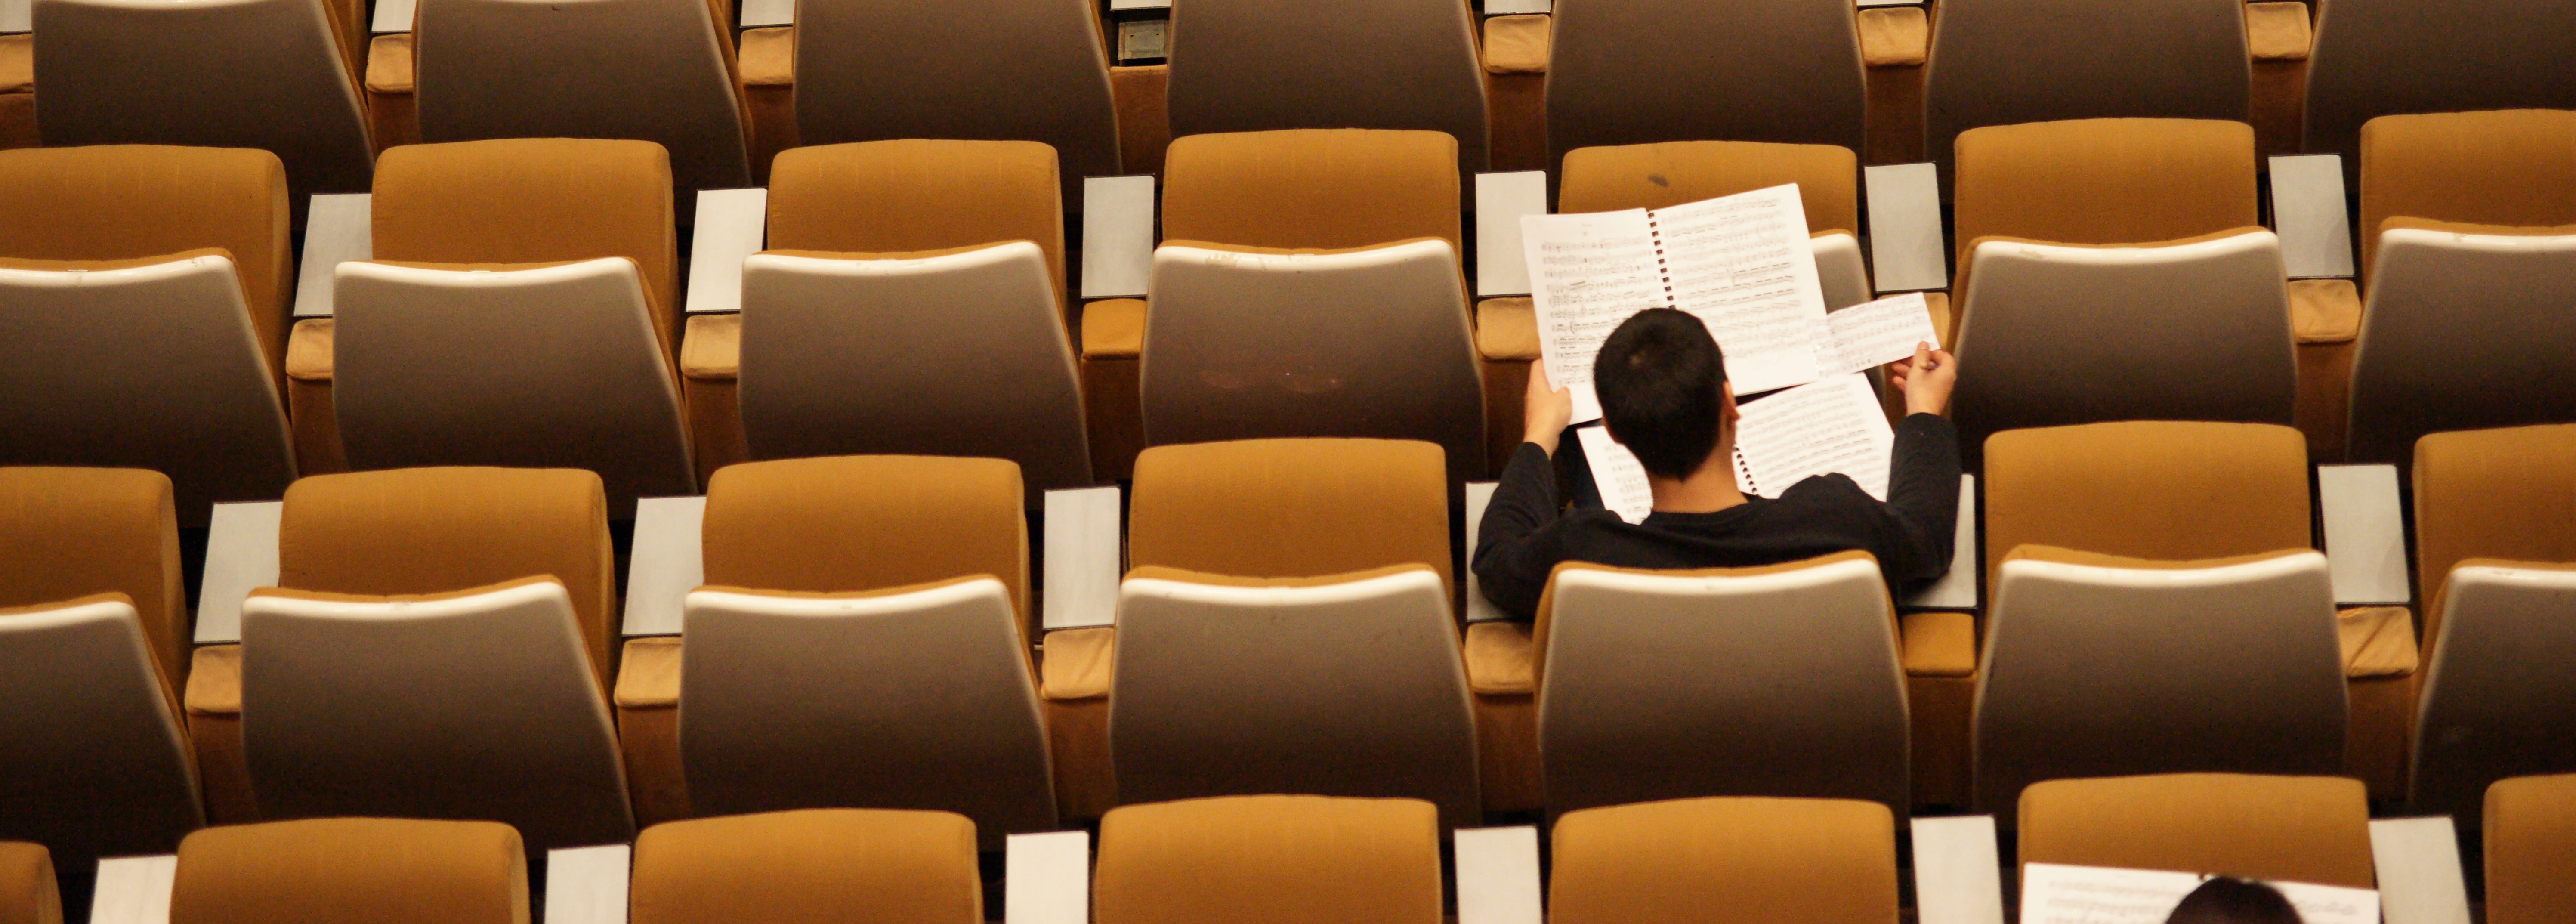 Student sitting in an otherwise empty lecture hall.